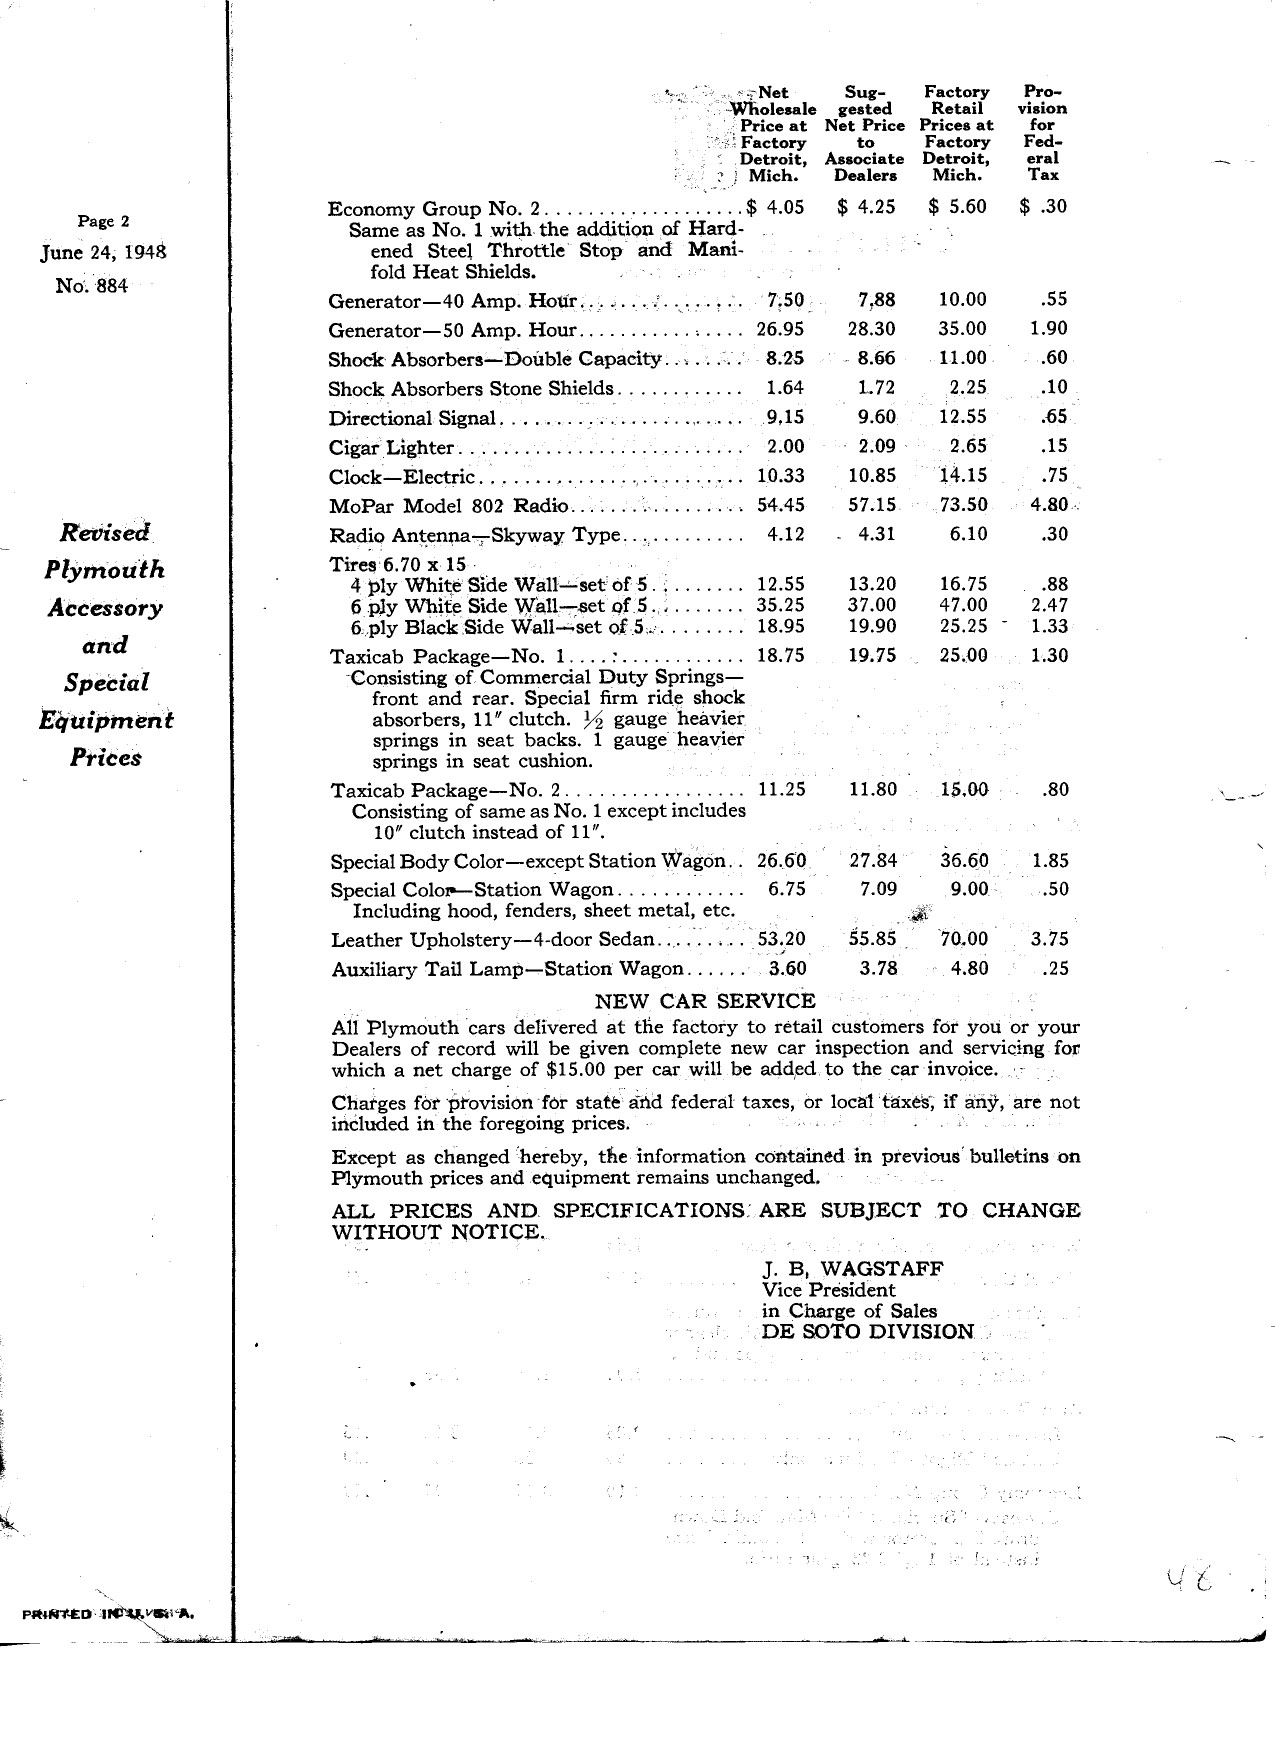 1948 Plymouth Revised Accessory Prices-02